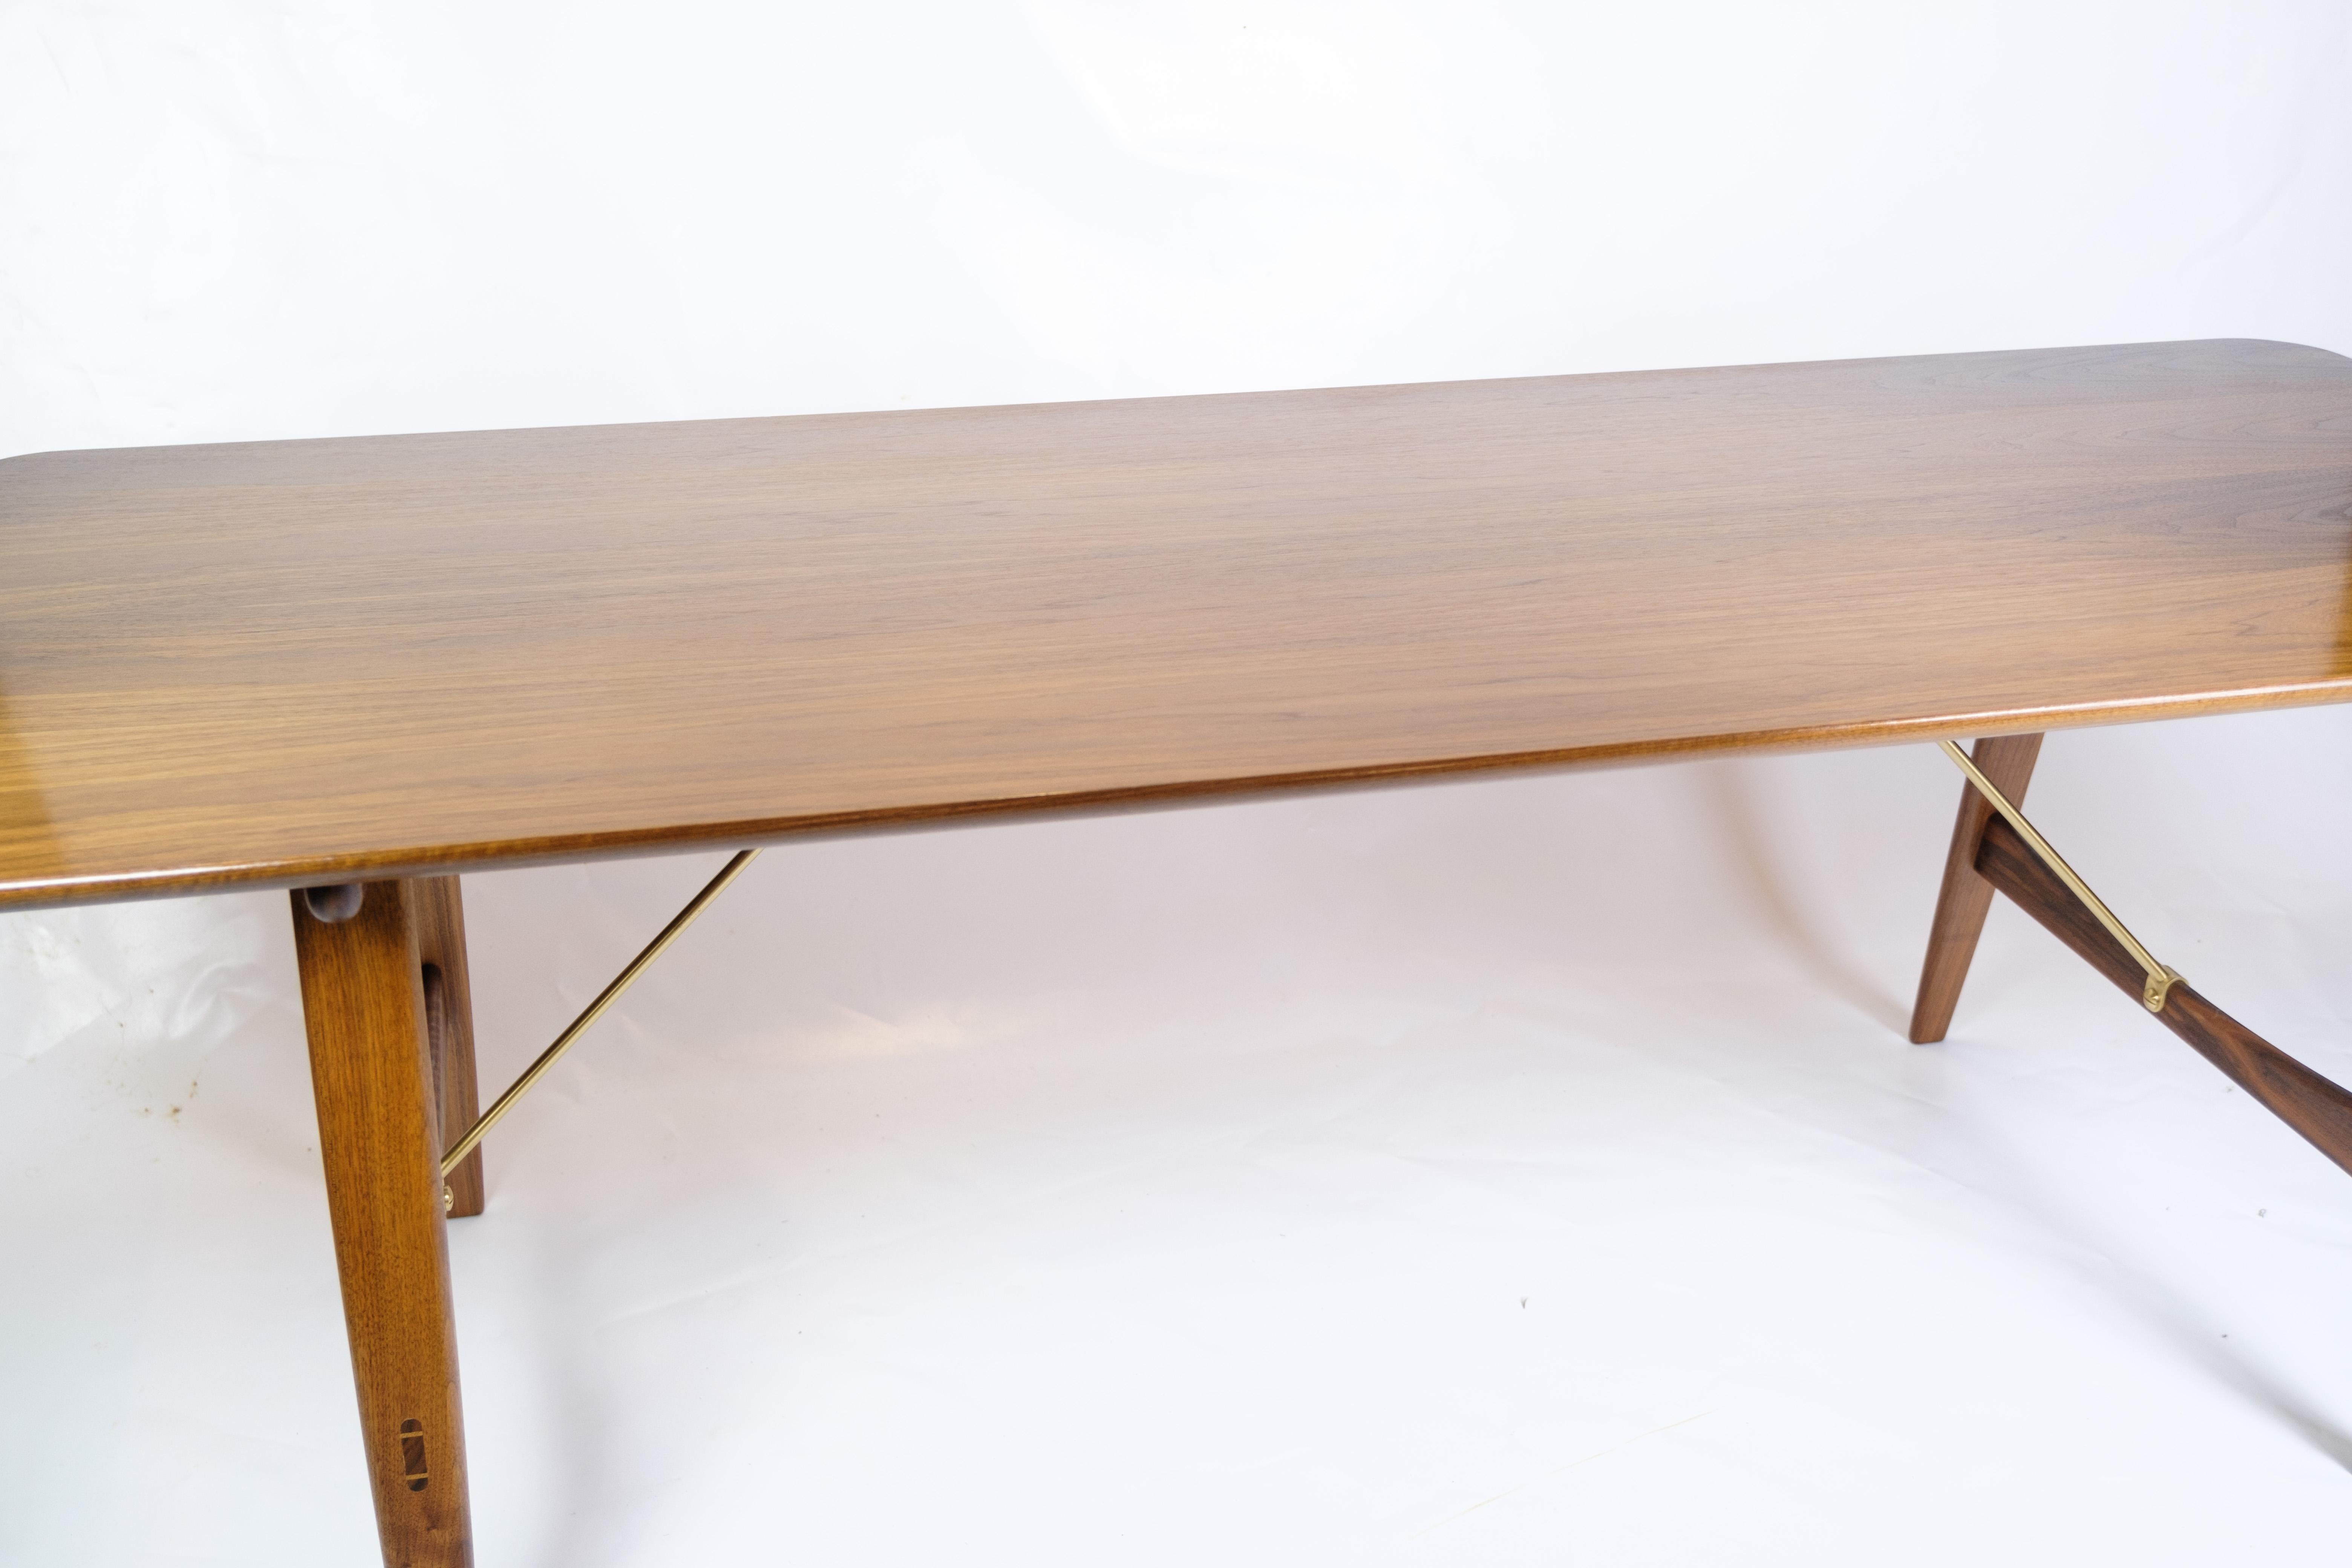 The hunting table, known as Model BM1160, is a splendid example of Børge Mogensen's unique design aesthetic. Made of walnut wood and supported by brass crossbars, this table exudes elegance and functionality.

Børge Mogensen, one of Denmark's most